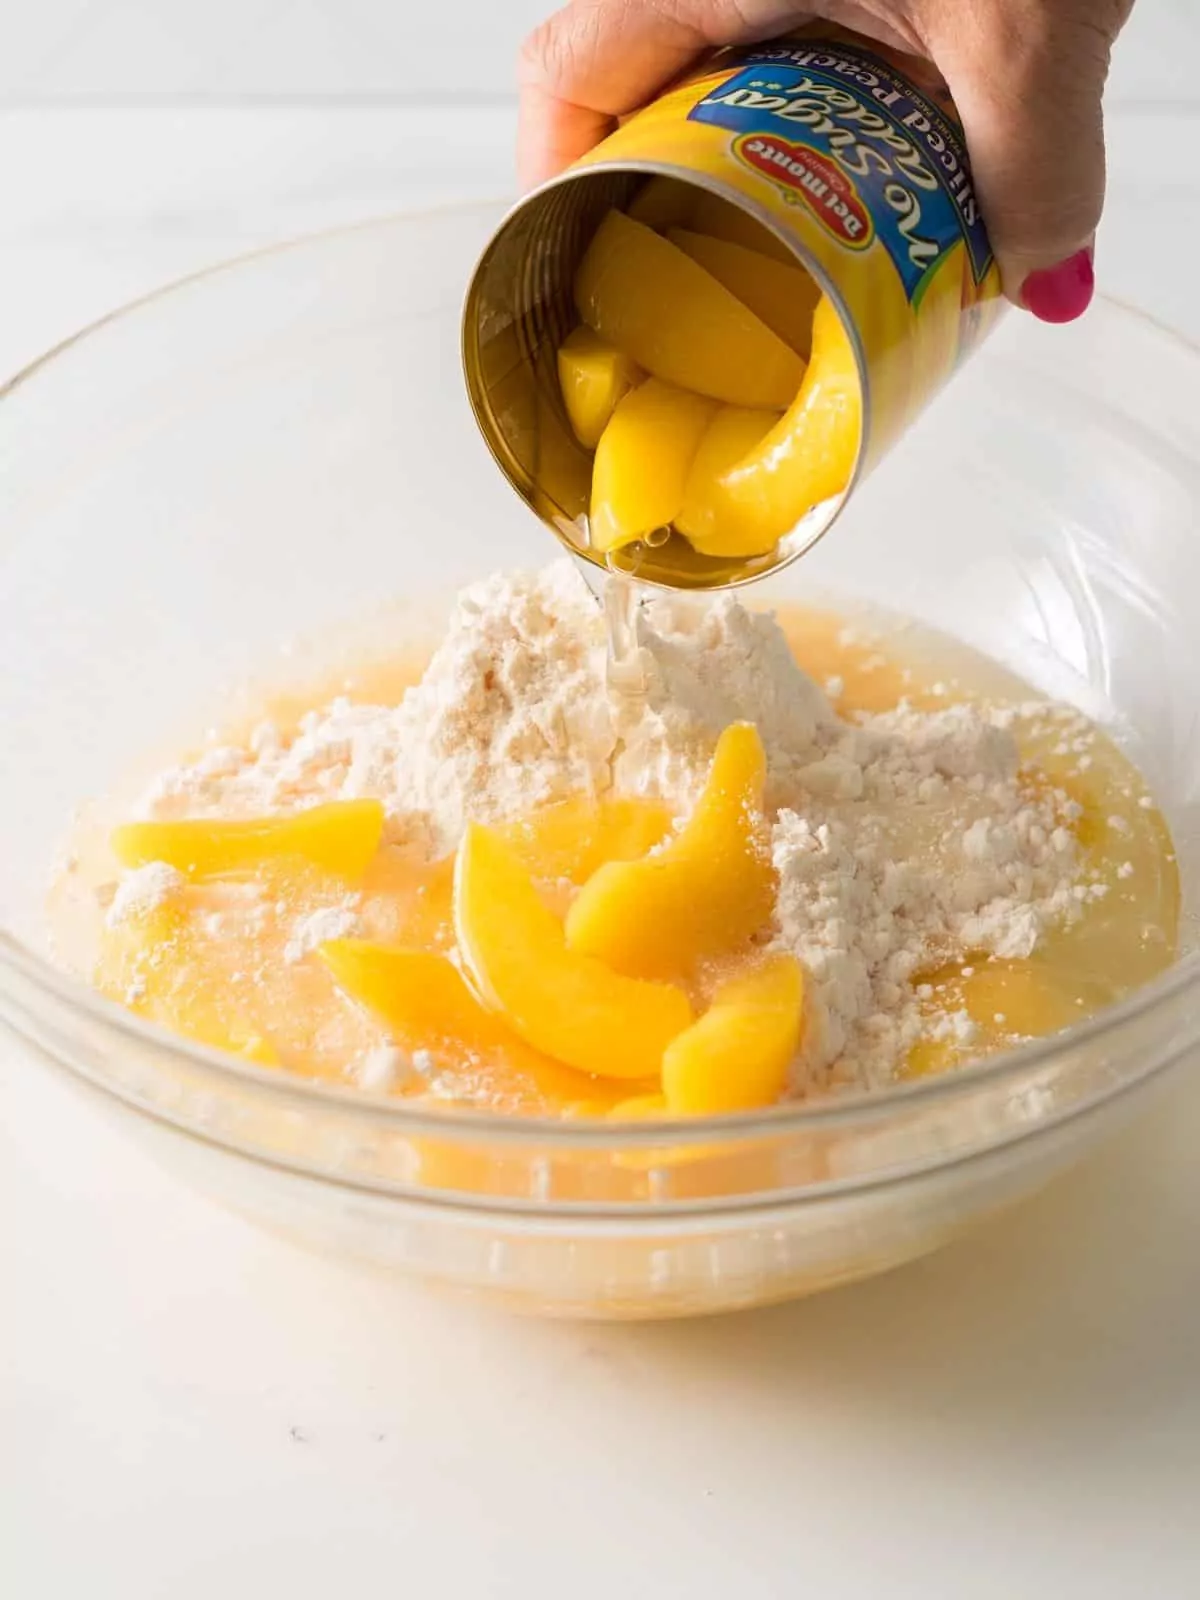 Add canned peaches to cake mix.